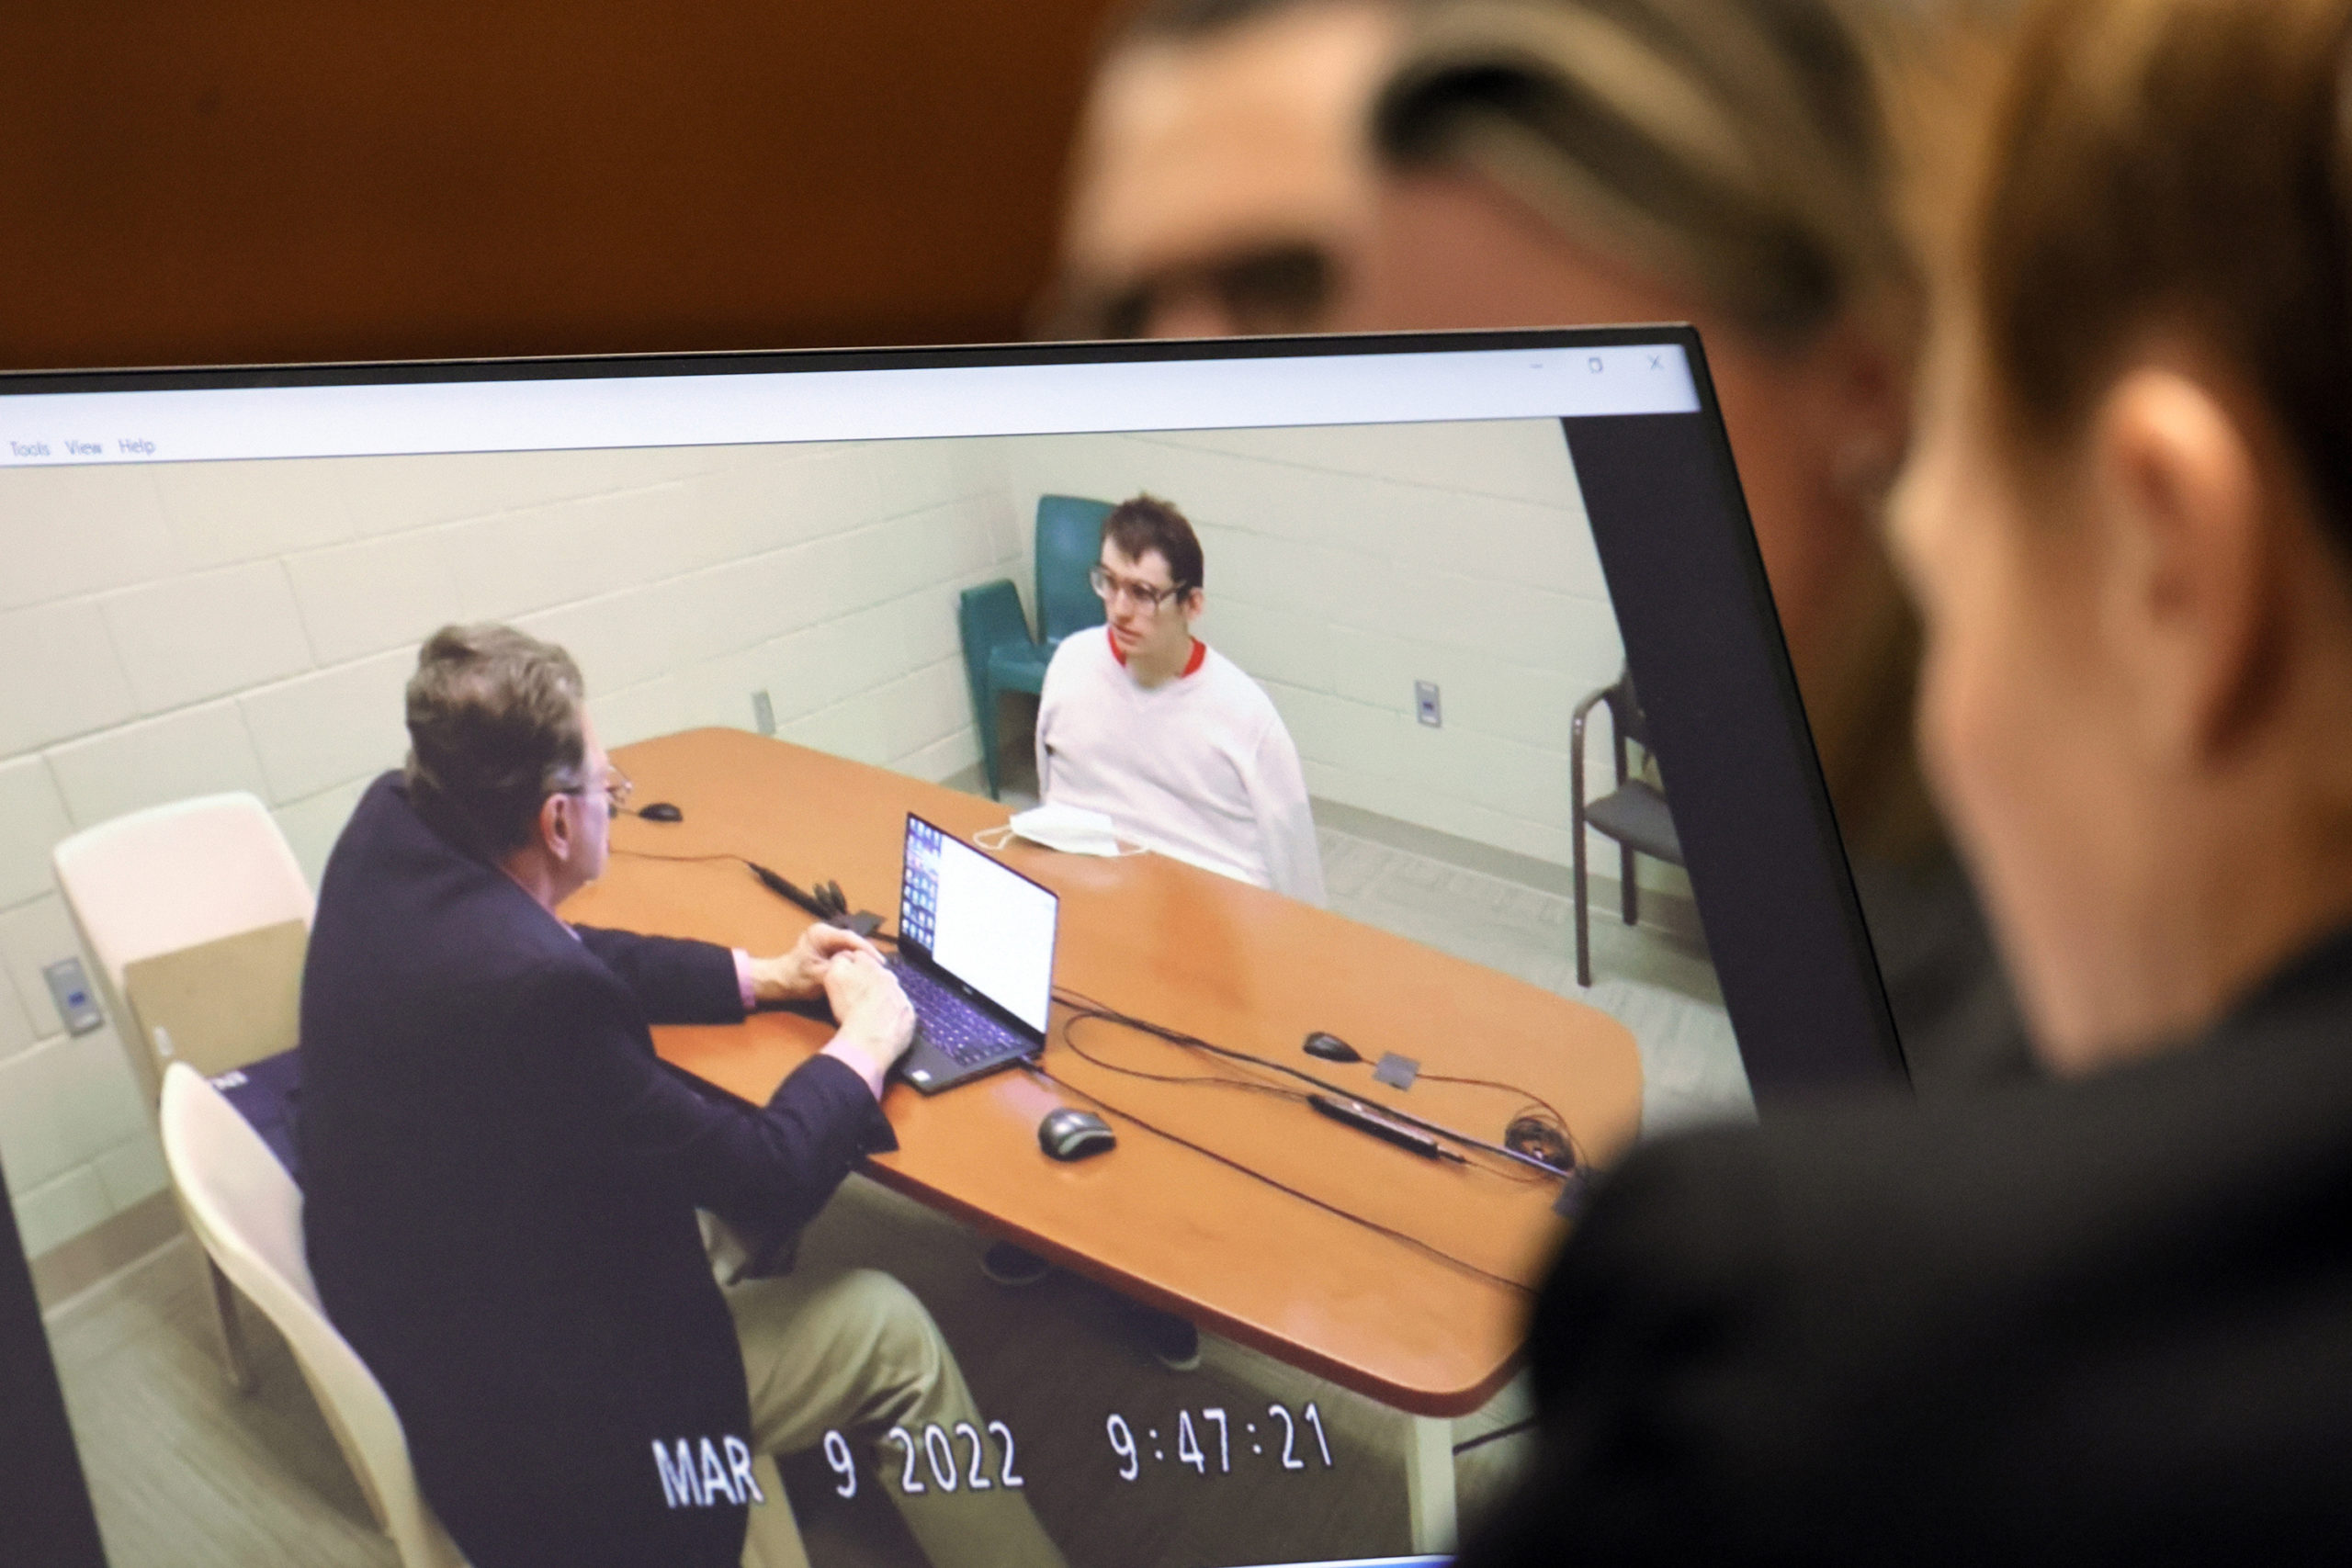 Marjory Stoneman Douglas High School shooter Nikolas Cruz is shown on a courtroom monitor during a videotaped interview with clinical neuropsychologist Dr. Robert Denney in Fort Lauderdale, Florida, on Thursday.